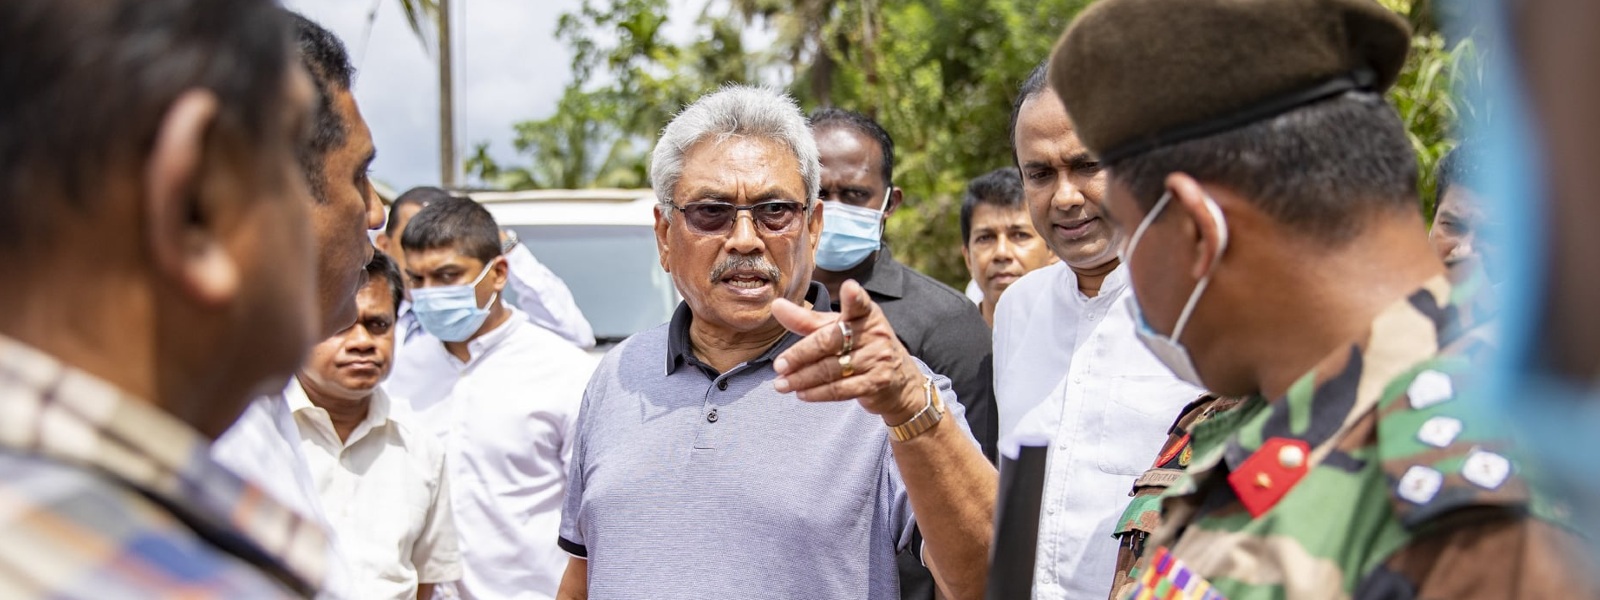 Road project must not harm Sinharaja: President